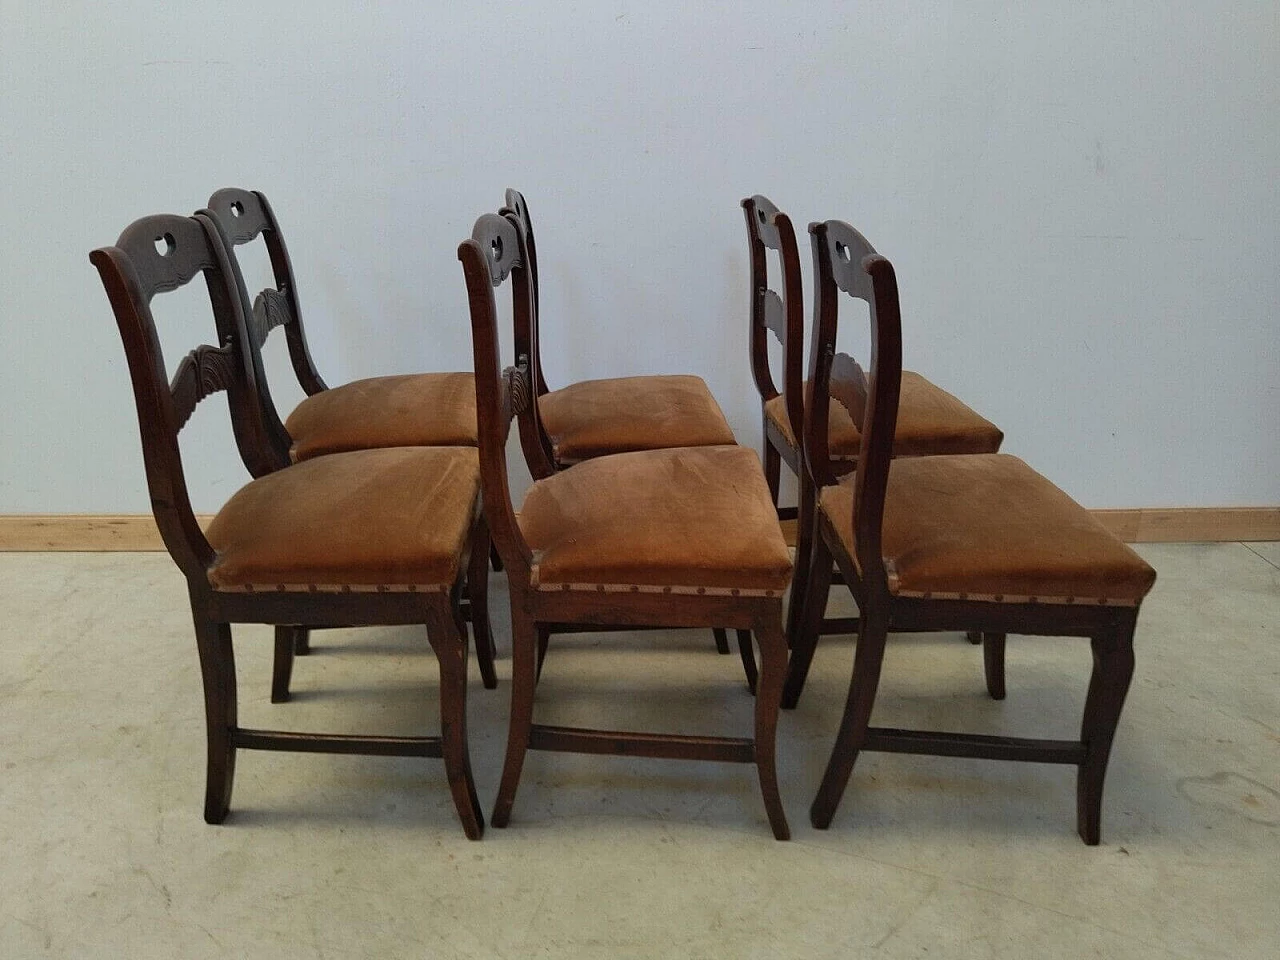 6 Empire-style walnut chairs, early 19th century 6